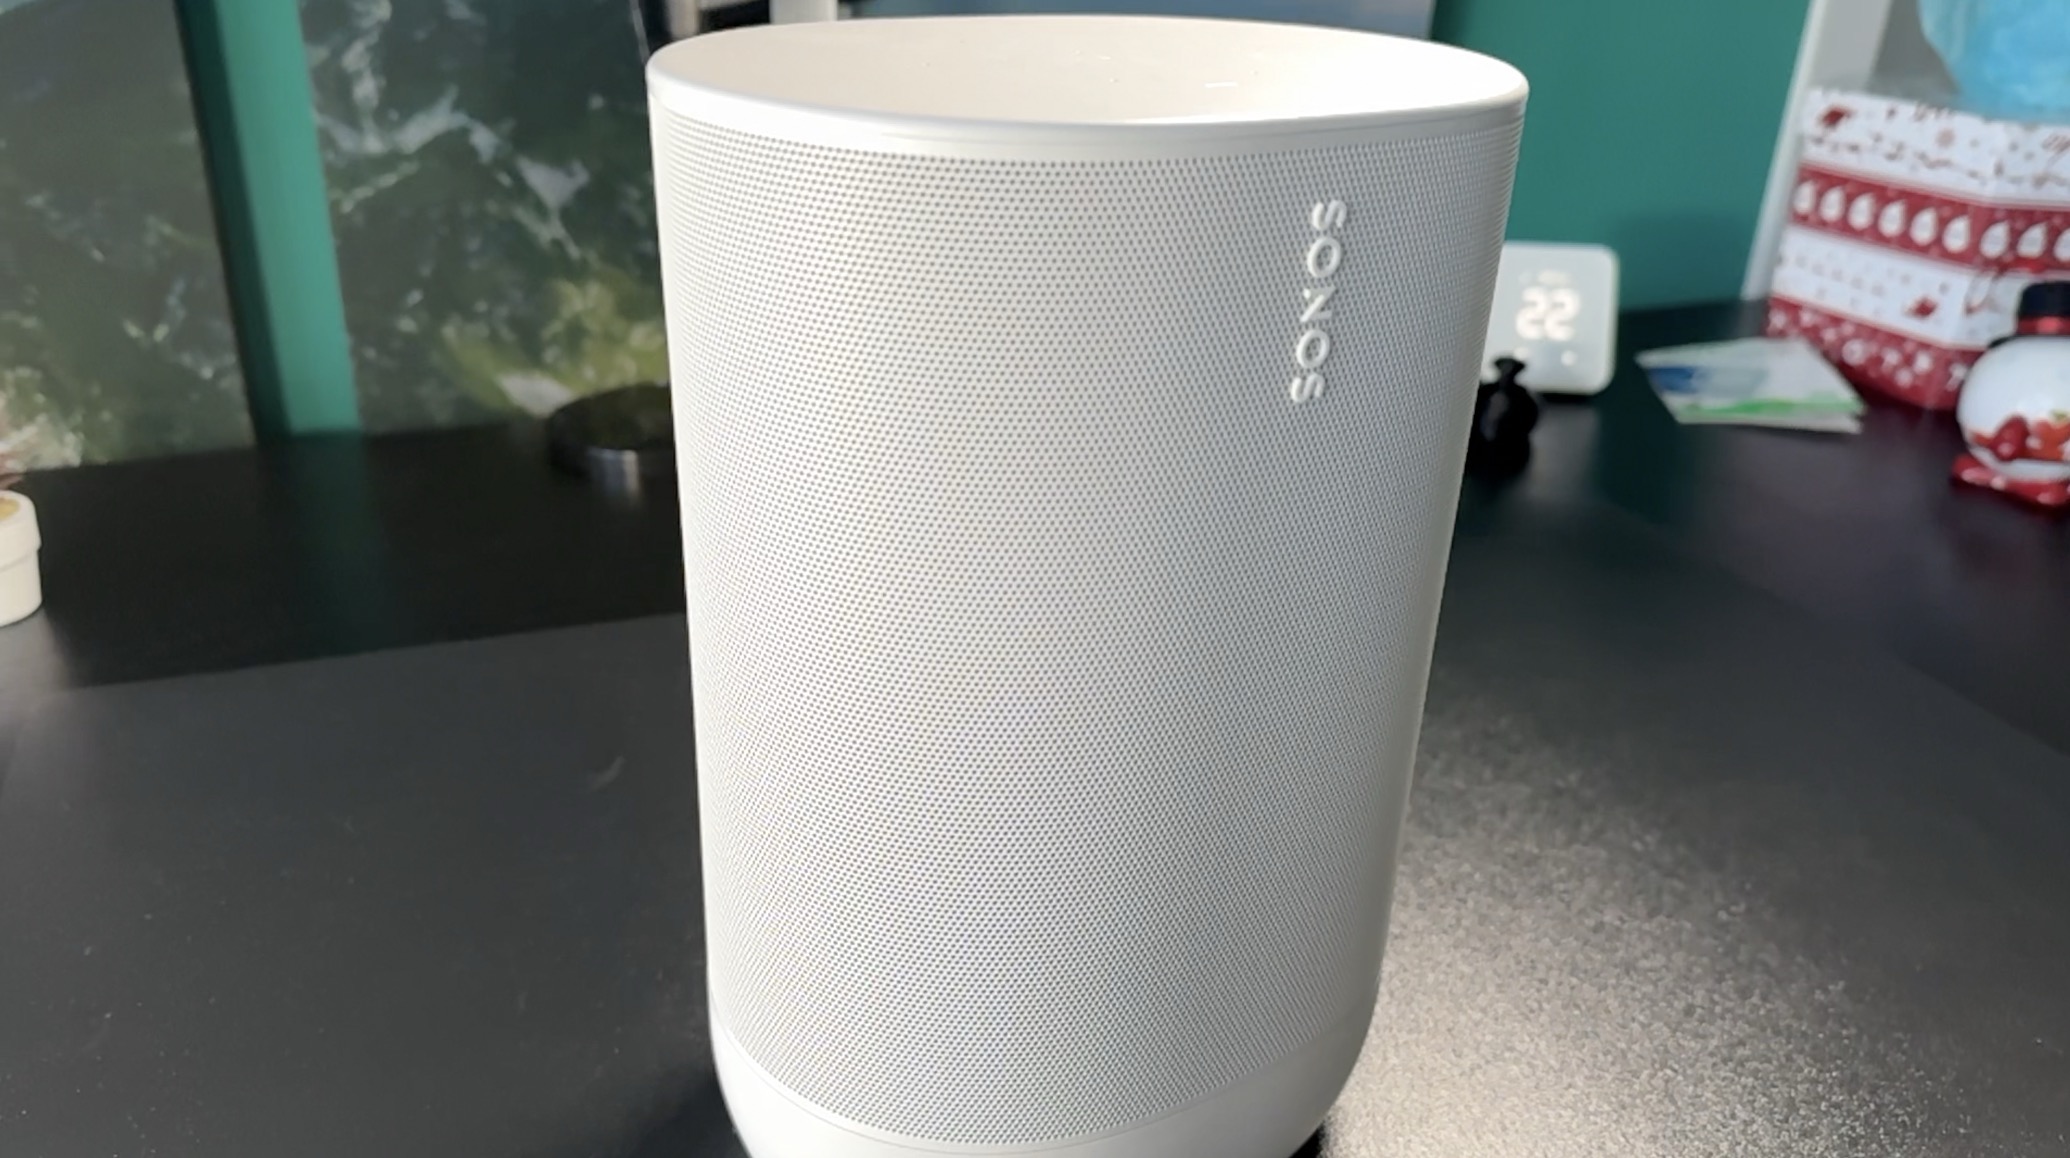 Home Assistant Sonos integration is one of the best